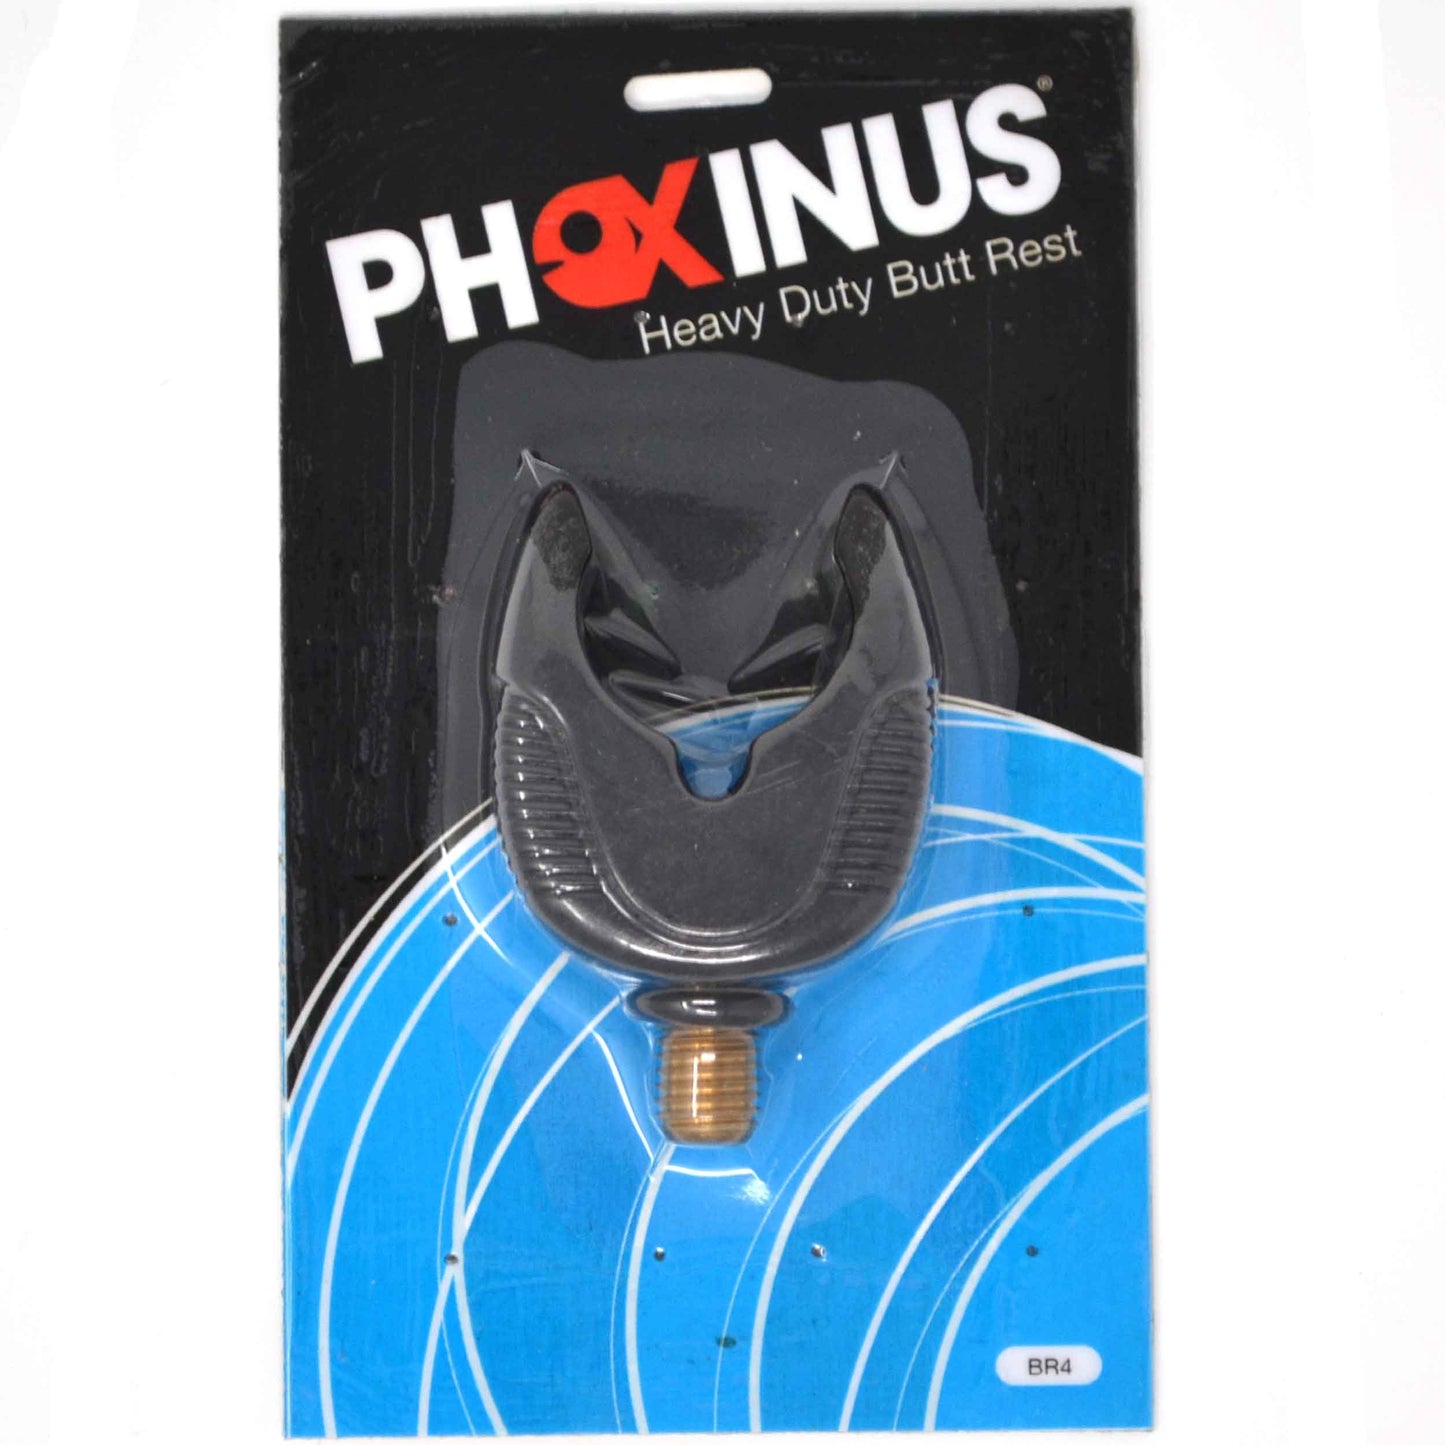 3 Phoxinus Heavy Duty Rubber Butt Rests / Rod Rests